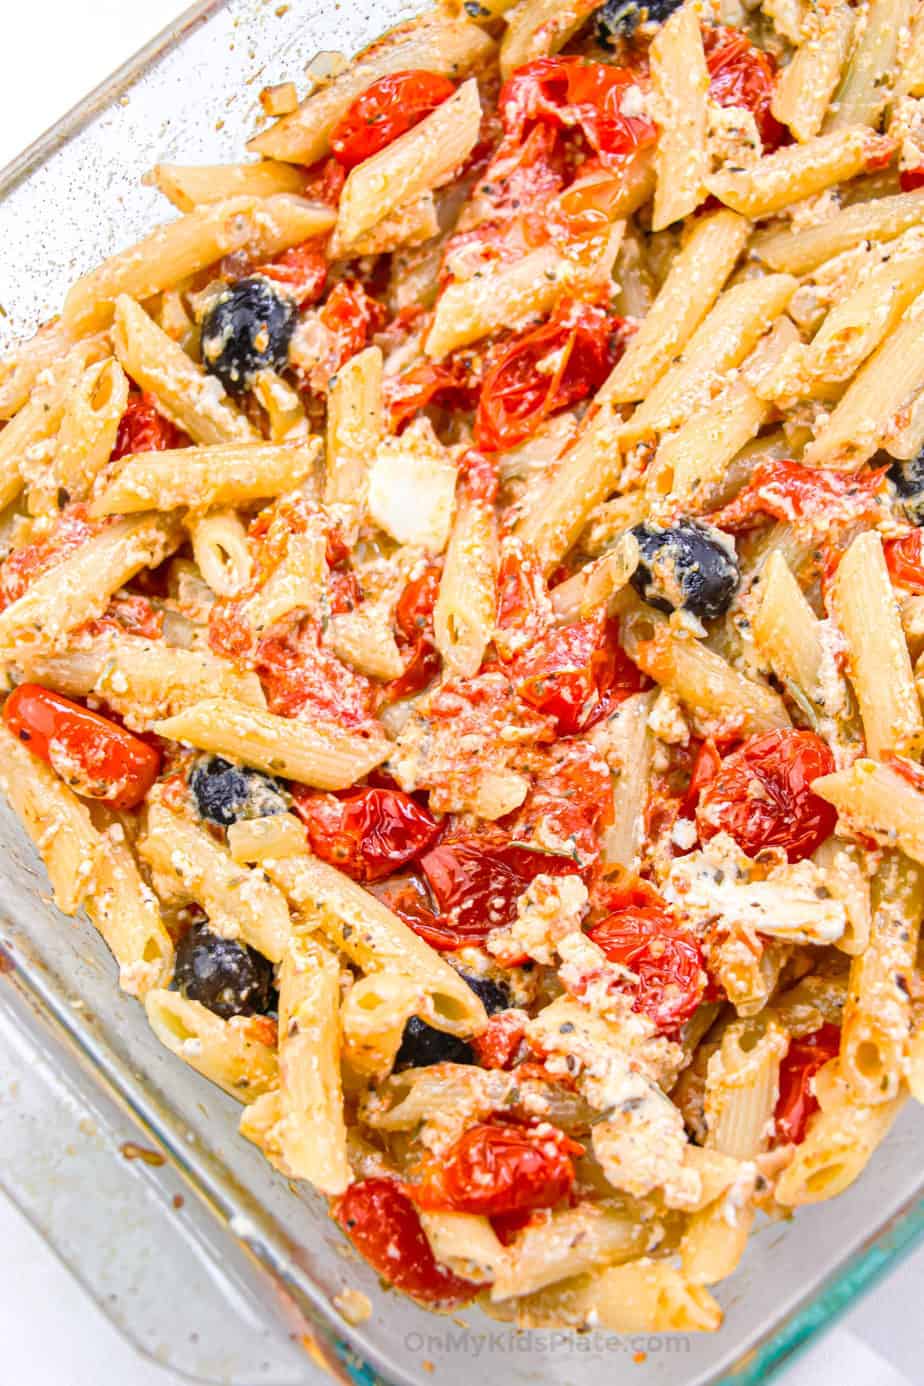 Penne pasta with roasted tomatoes, olives and feta cheese mixed in a casserole dish.